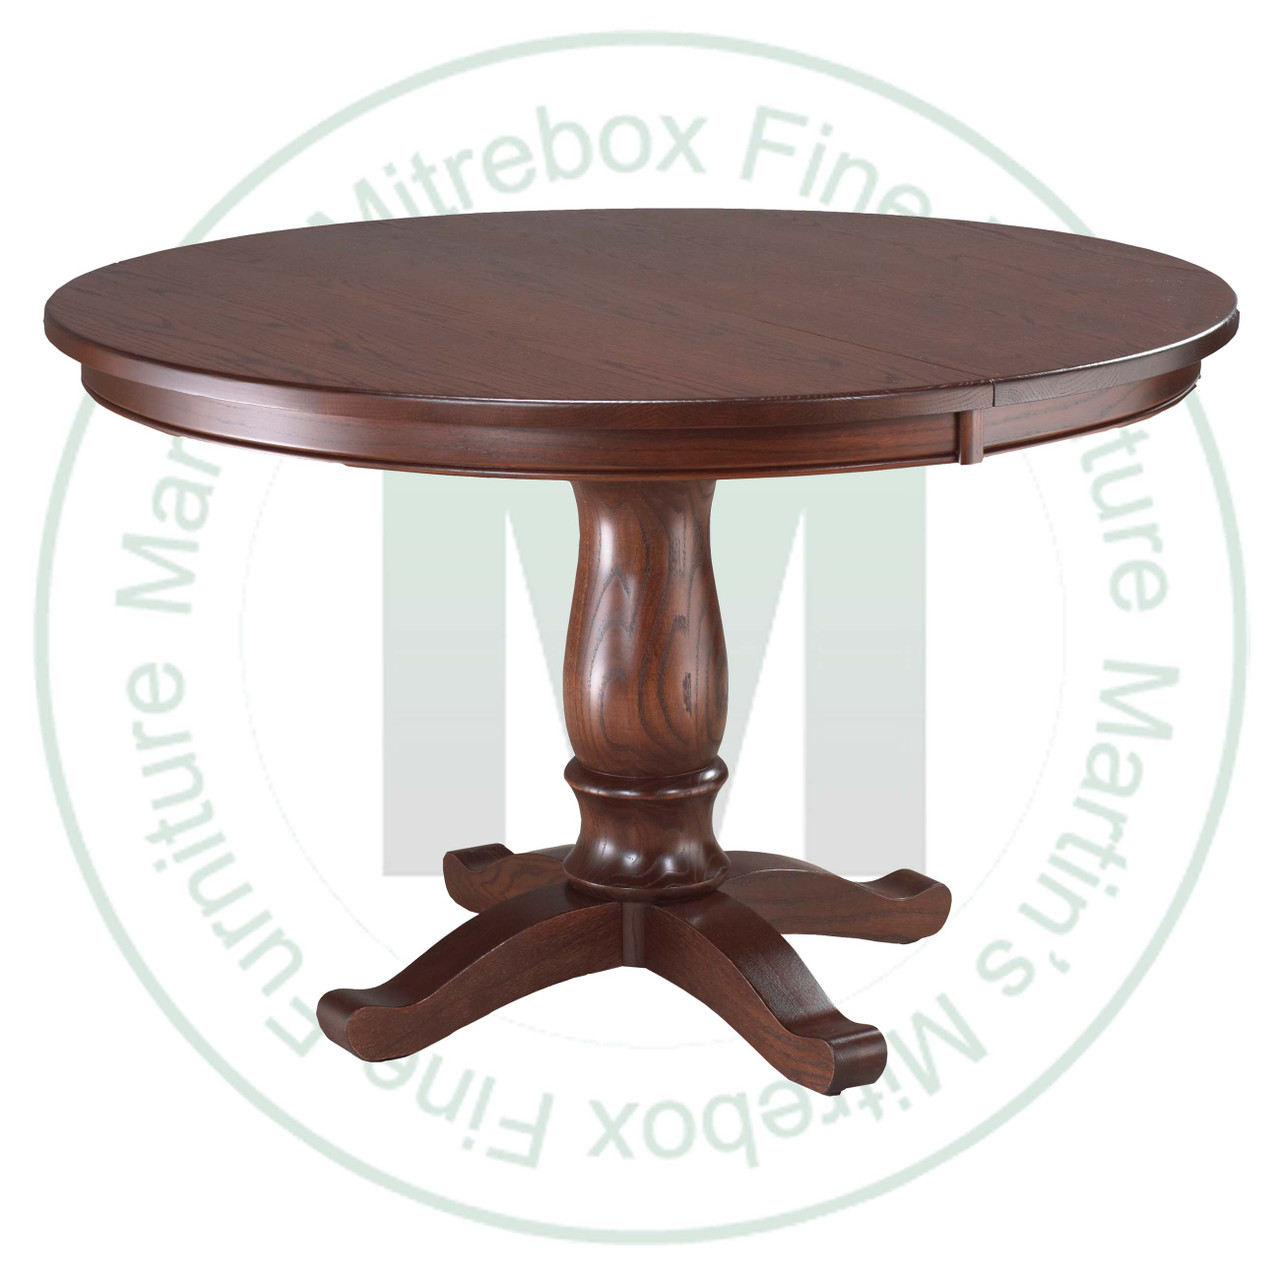 Oak Kimberly Crest Single Pedestal Table 60''D x 60''W x 30''H Round Solid Table